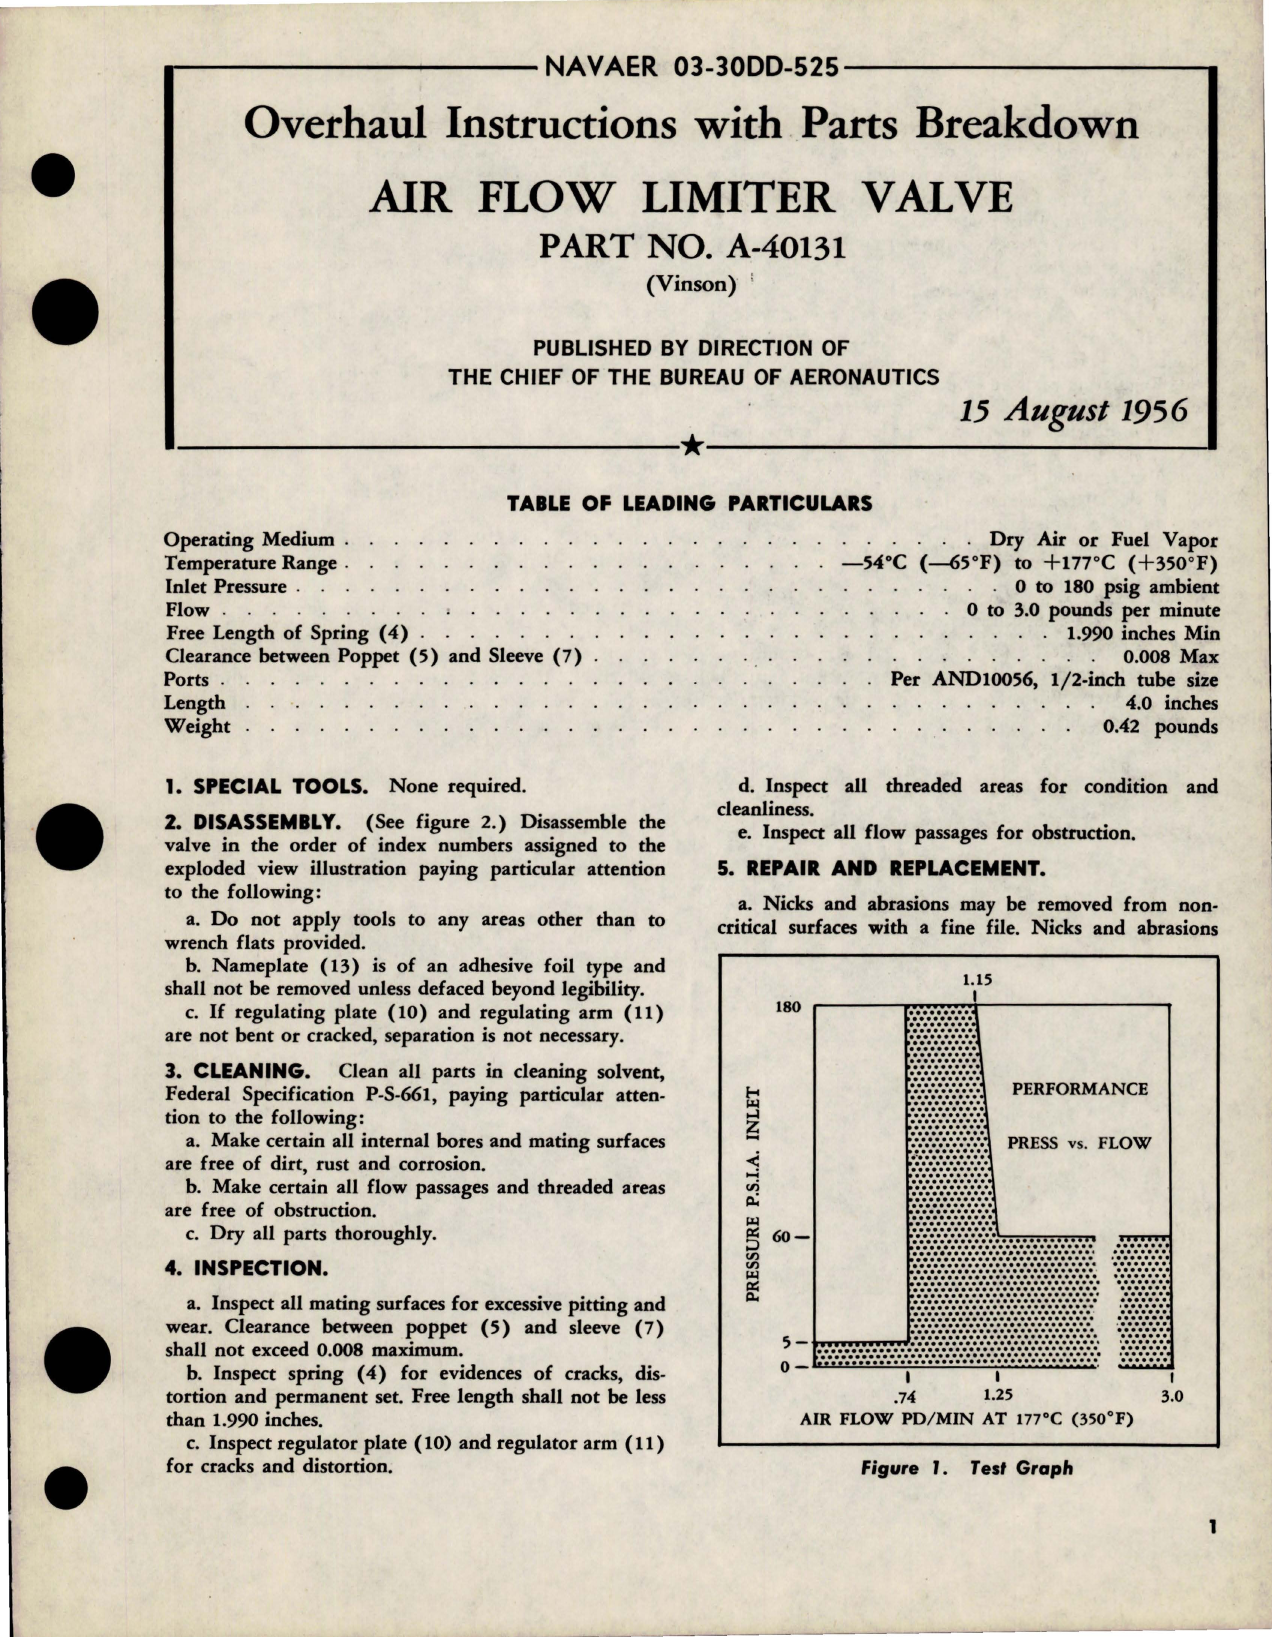 Sample page 1 from AirCorps Library document: Overhaul Instructions with Parts Breakdown for Air Flow Limiter Valve - Part A-40131